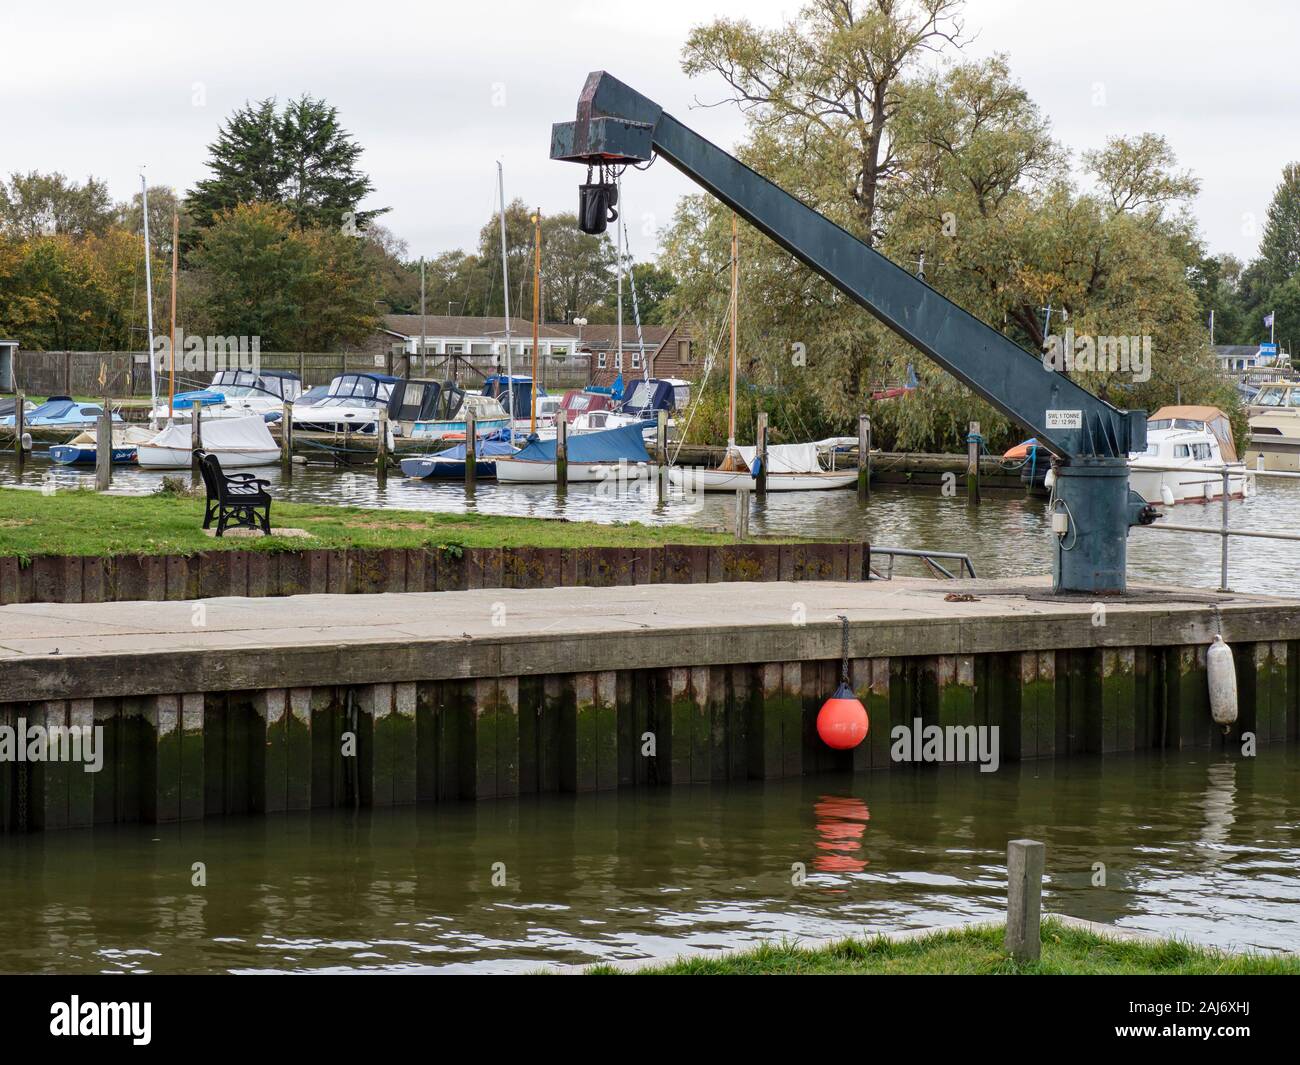 OULTON BROAD, SUFFOLK:  Crane on the quay at Oulton Broad Stock Photo